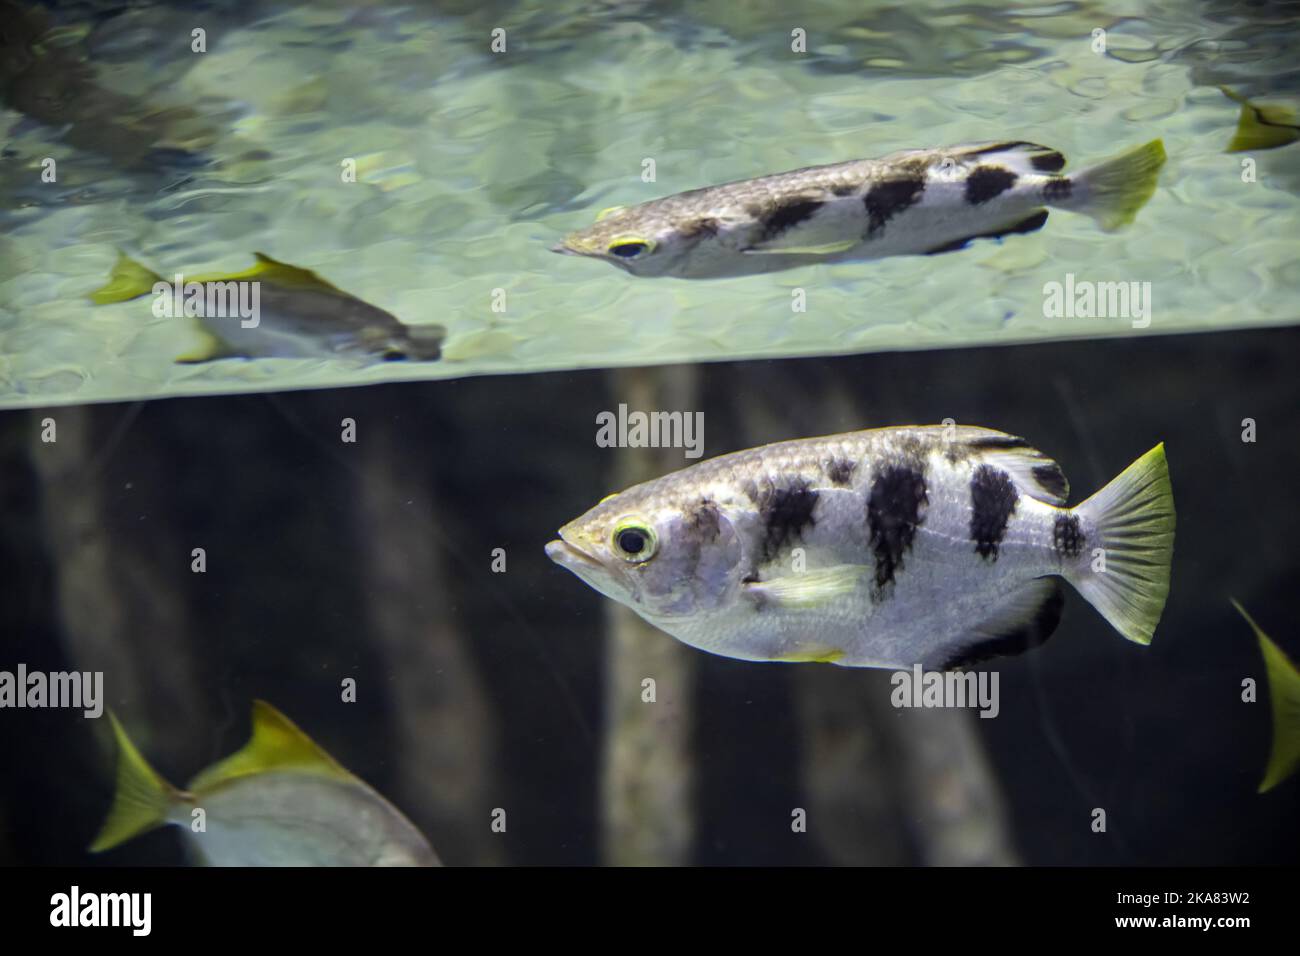 The banded archerfish (Toxotes jaculatrix) is a brackish water perciform fish. It is silvery in colour and has a dorsal fin towards the posterior end. Stock Photo